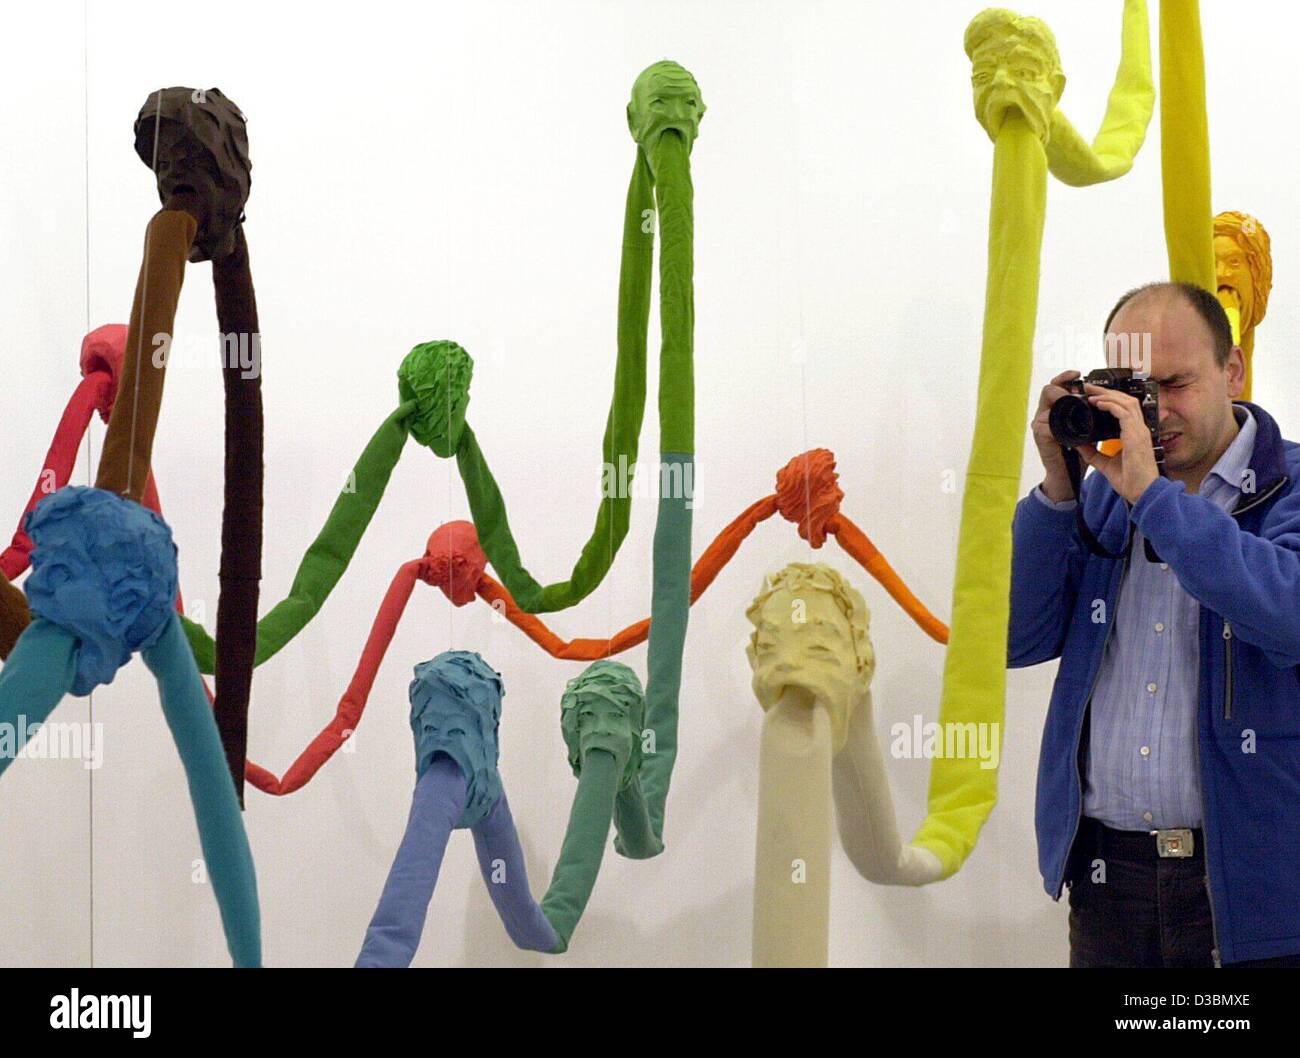 (dpa) - The German artist from Berlin Marcus Weber takes a picture of his sculpture 'Unersättlicher Kreislauf' (insatiable circuit) at the 15th Art Frankfurt, in Germany, 26 April 2003. Weber's sculpture is made of paper and sleaze, measures 20 metres and is offered for 22,000 Euros by the gallery H Stock Photo